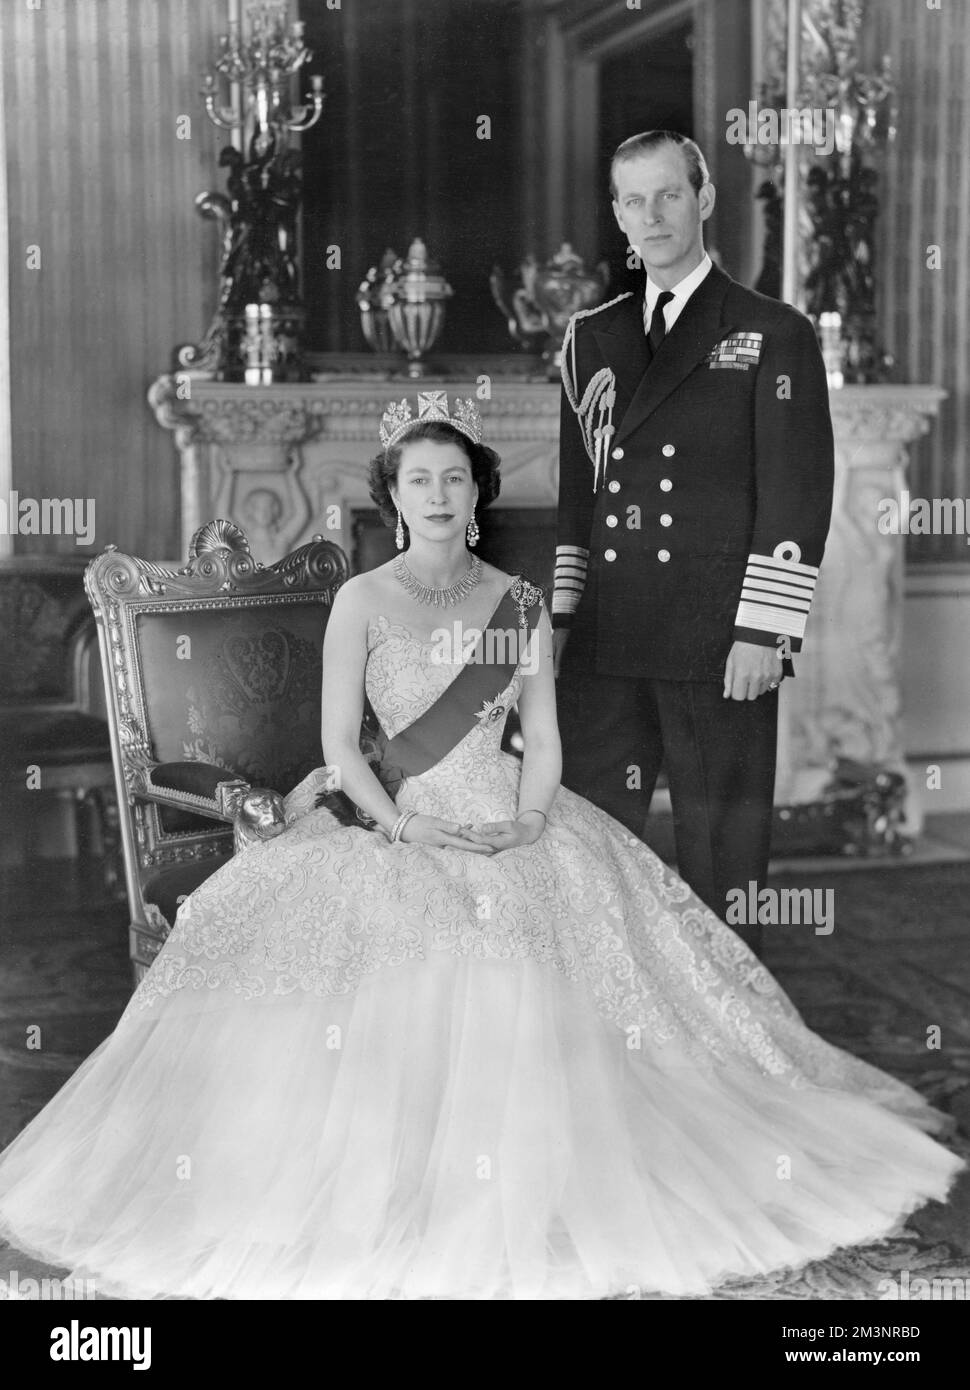 Queen Elizabeth II and Prince Philip, Duke of Edinburgh pictured together in the Grand Entrance in Buckingham Palace in 1954.  The Queen is wearing a yellow tulle evening gown decorated with sprays of mimosa and gold pailette embroidery and is wearing the blue Ribbon and Star of the Garter.  Her necklace was a wedding present from the Nizam of Hyderabad; the tiara also a wedding present from Queen Mary.  The bow brooch and drop earrings are set with diamonds.  The Duke is wearing the uniform of the Admiral of the Fleet.     Date: 1954 Stock Photo